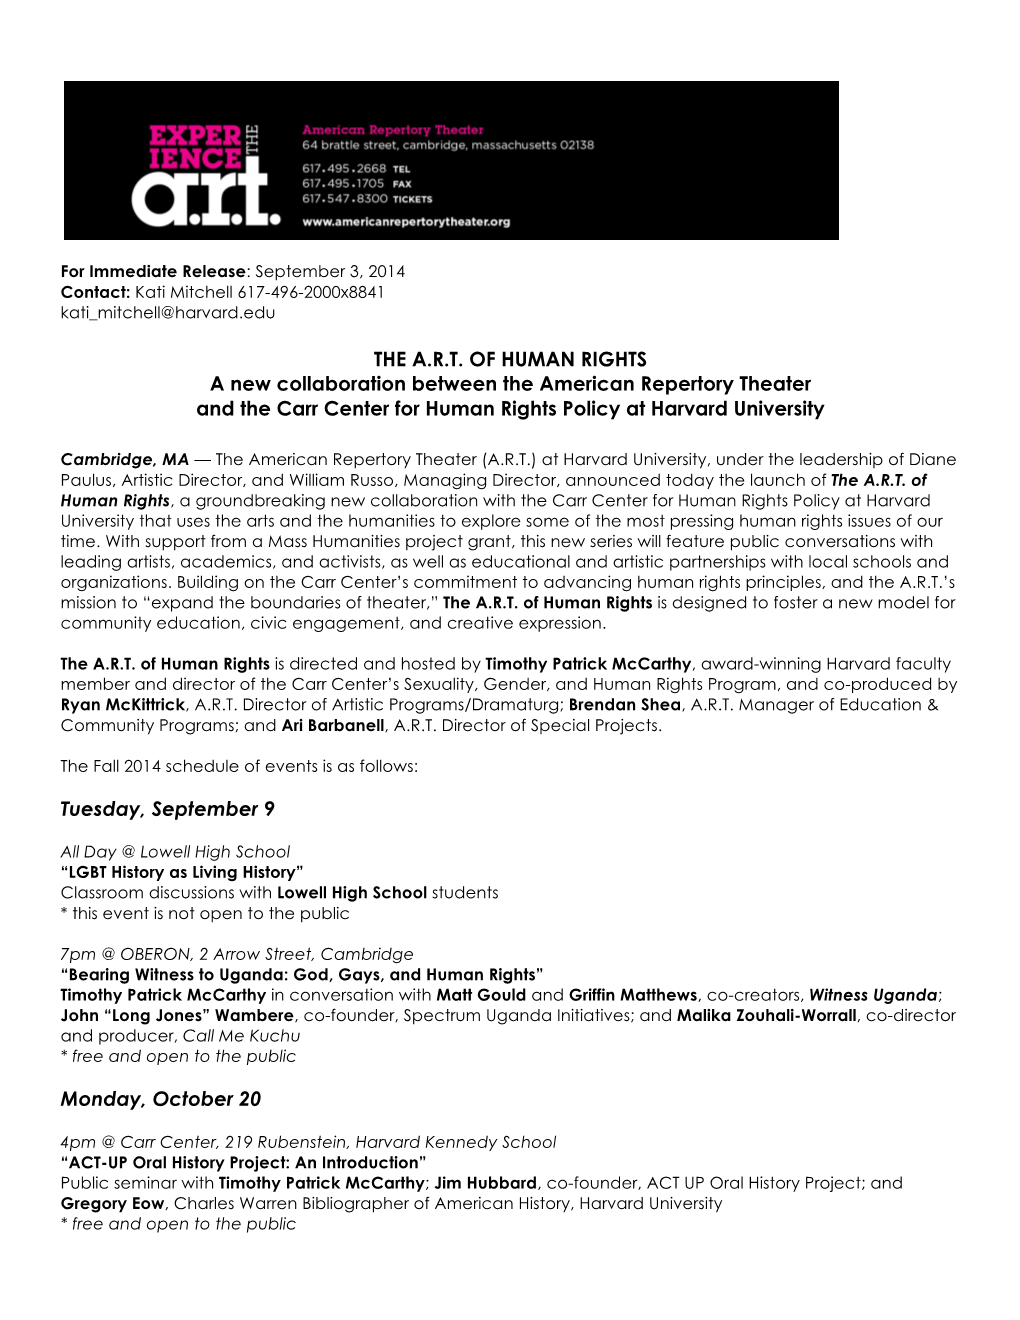 THE A.R.T. of HUMAN RIGHTS a New Collaboration Between the American Repertory Theater and the Carr Center for Human Rights Policy at Harvard University